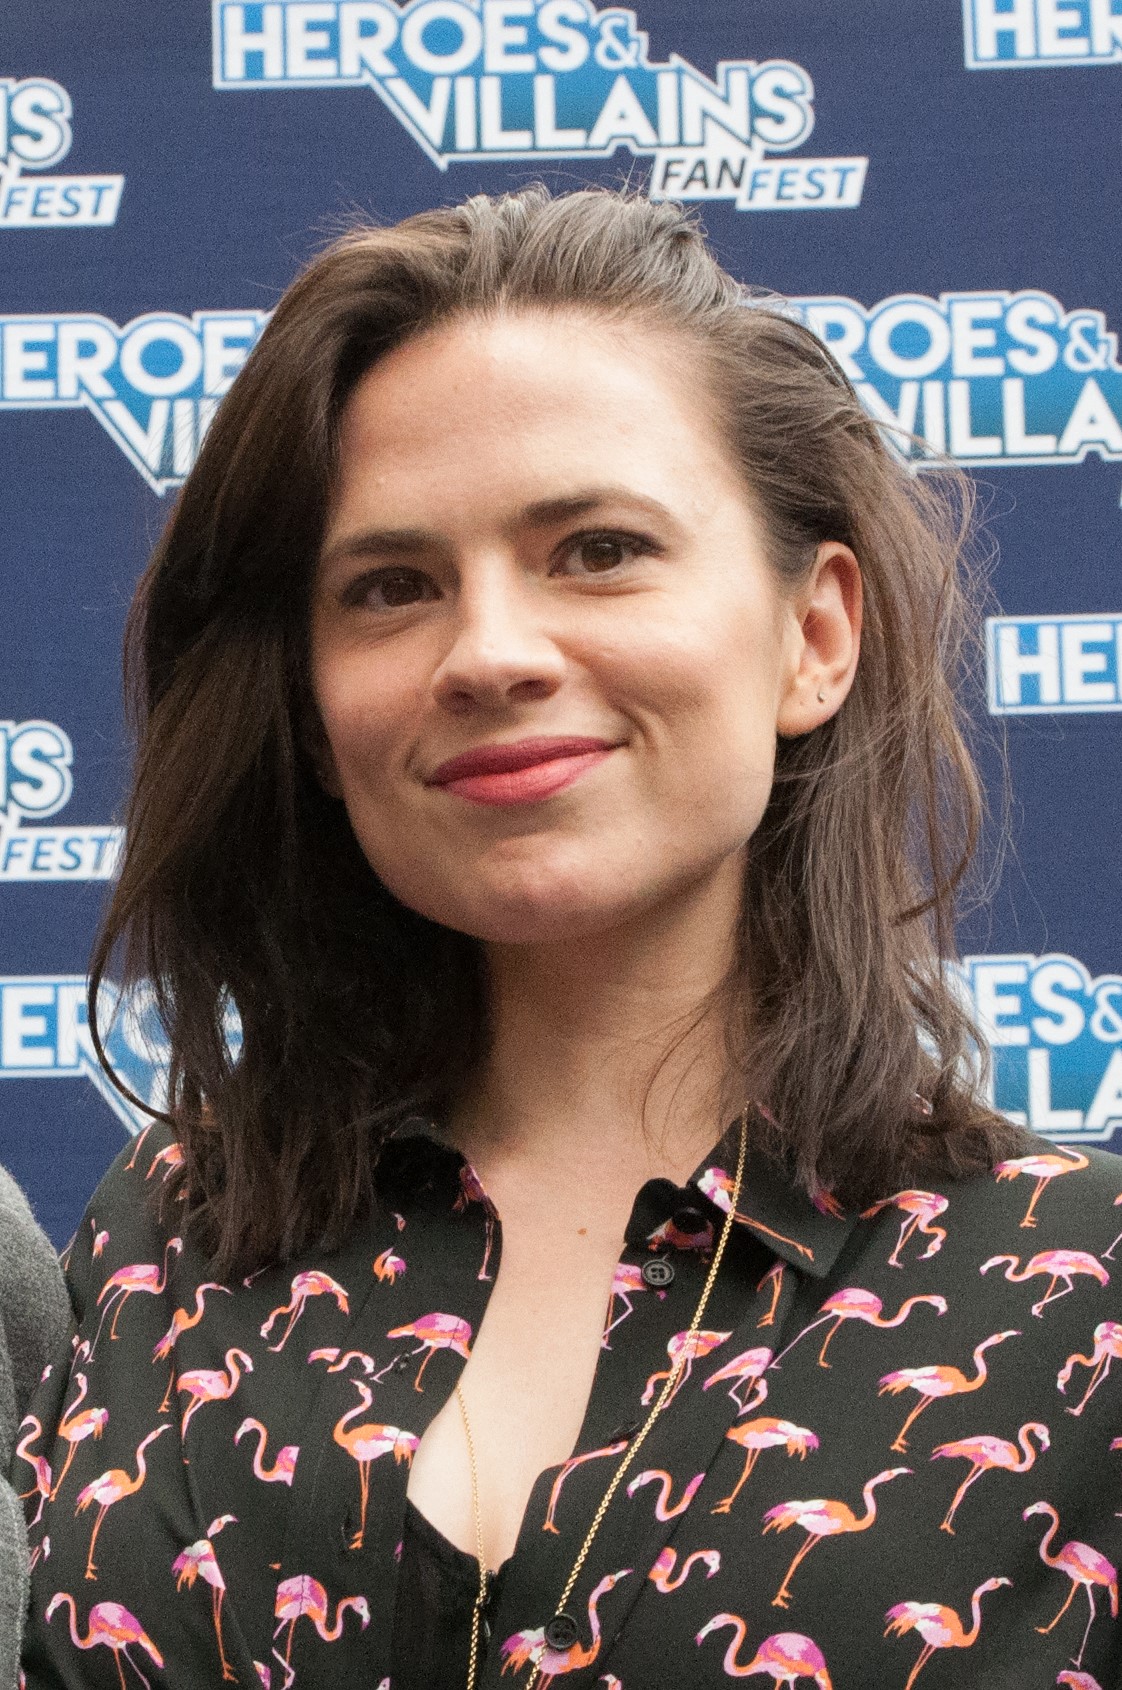 Atwell at Heroes & Villains Fan Fest 2017